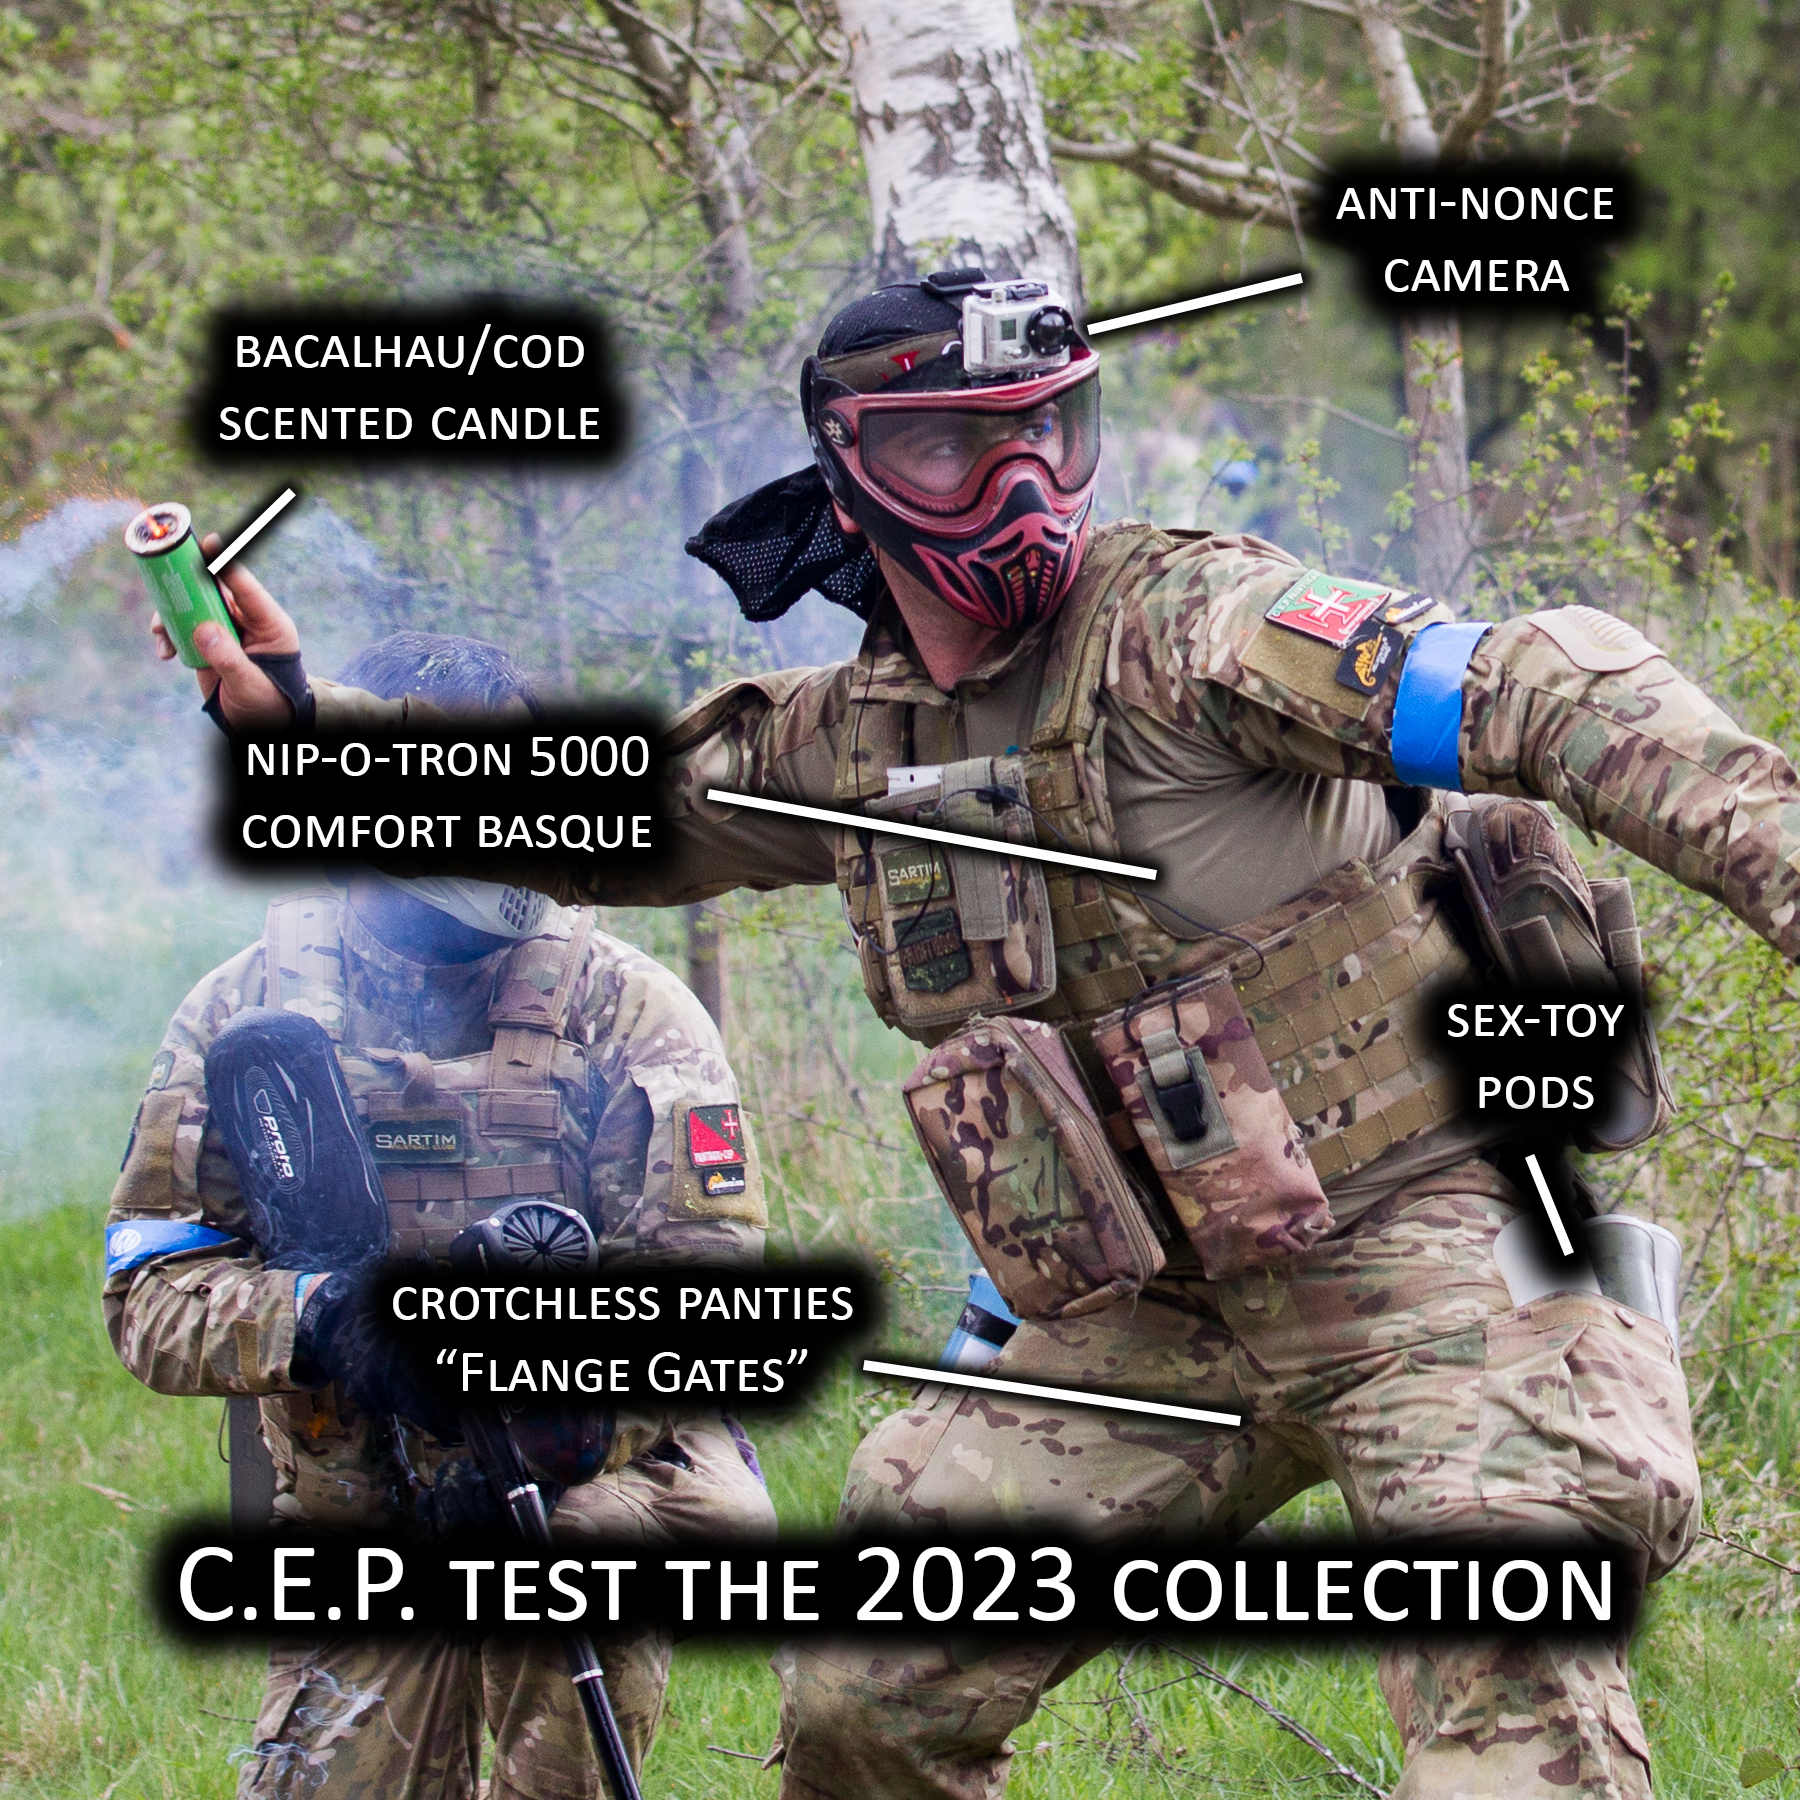 The C.E.P. Collection